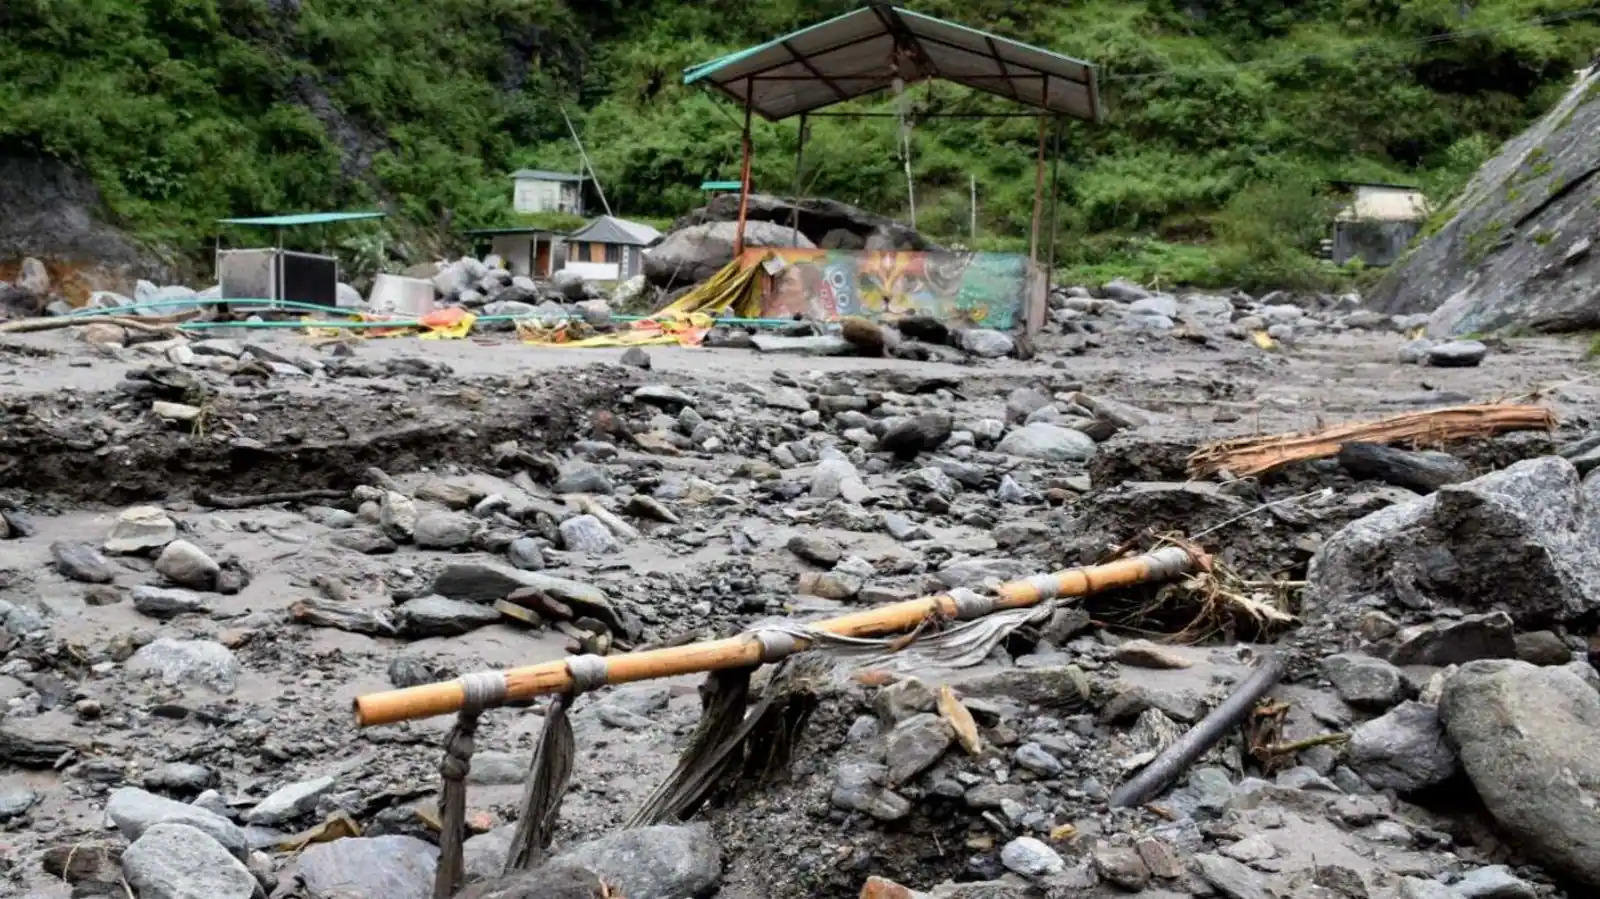 Himachal Pradesh is devastated by heavy rain; 5 people died in landslides, several Mandi shops were destroyed, and the Chandigarh-Manali route was closed.